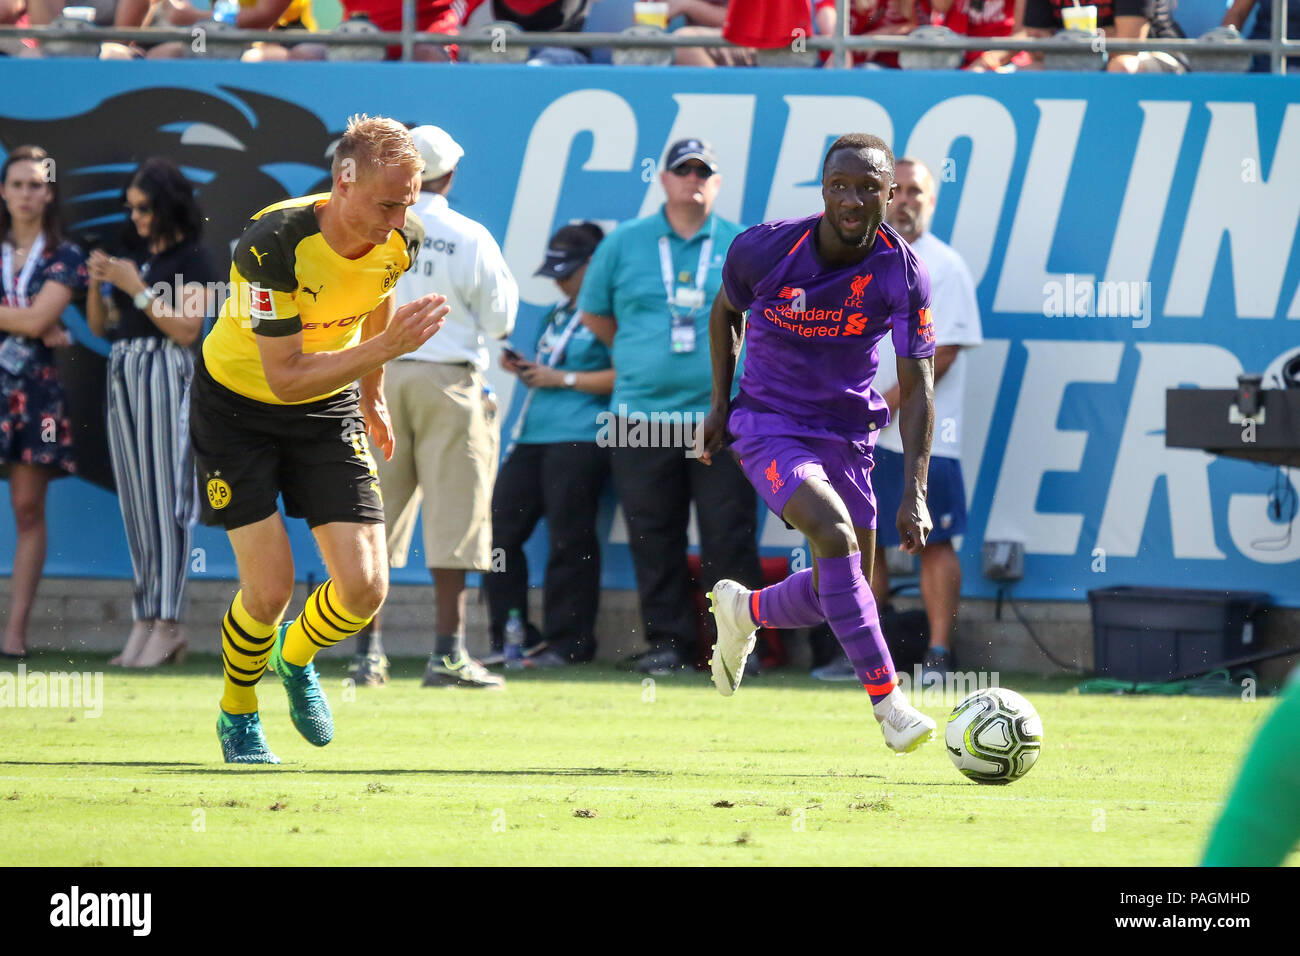 Charlotte, North Carolina, USA. 22nd July, 2018. Game action during an International Champions Cup match at Bank of America Stadium in Charlotte, NC. Borussia Dortmund of the German Bundesliga beat Liverpool of the English Premier League 3 to 1. Credit: Jason Walle/ZUMA Wire/Alamy Live News Stock Photo